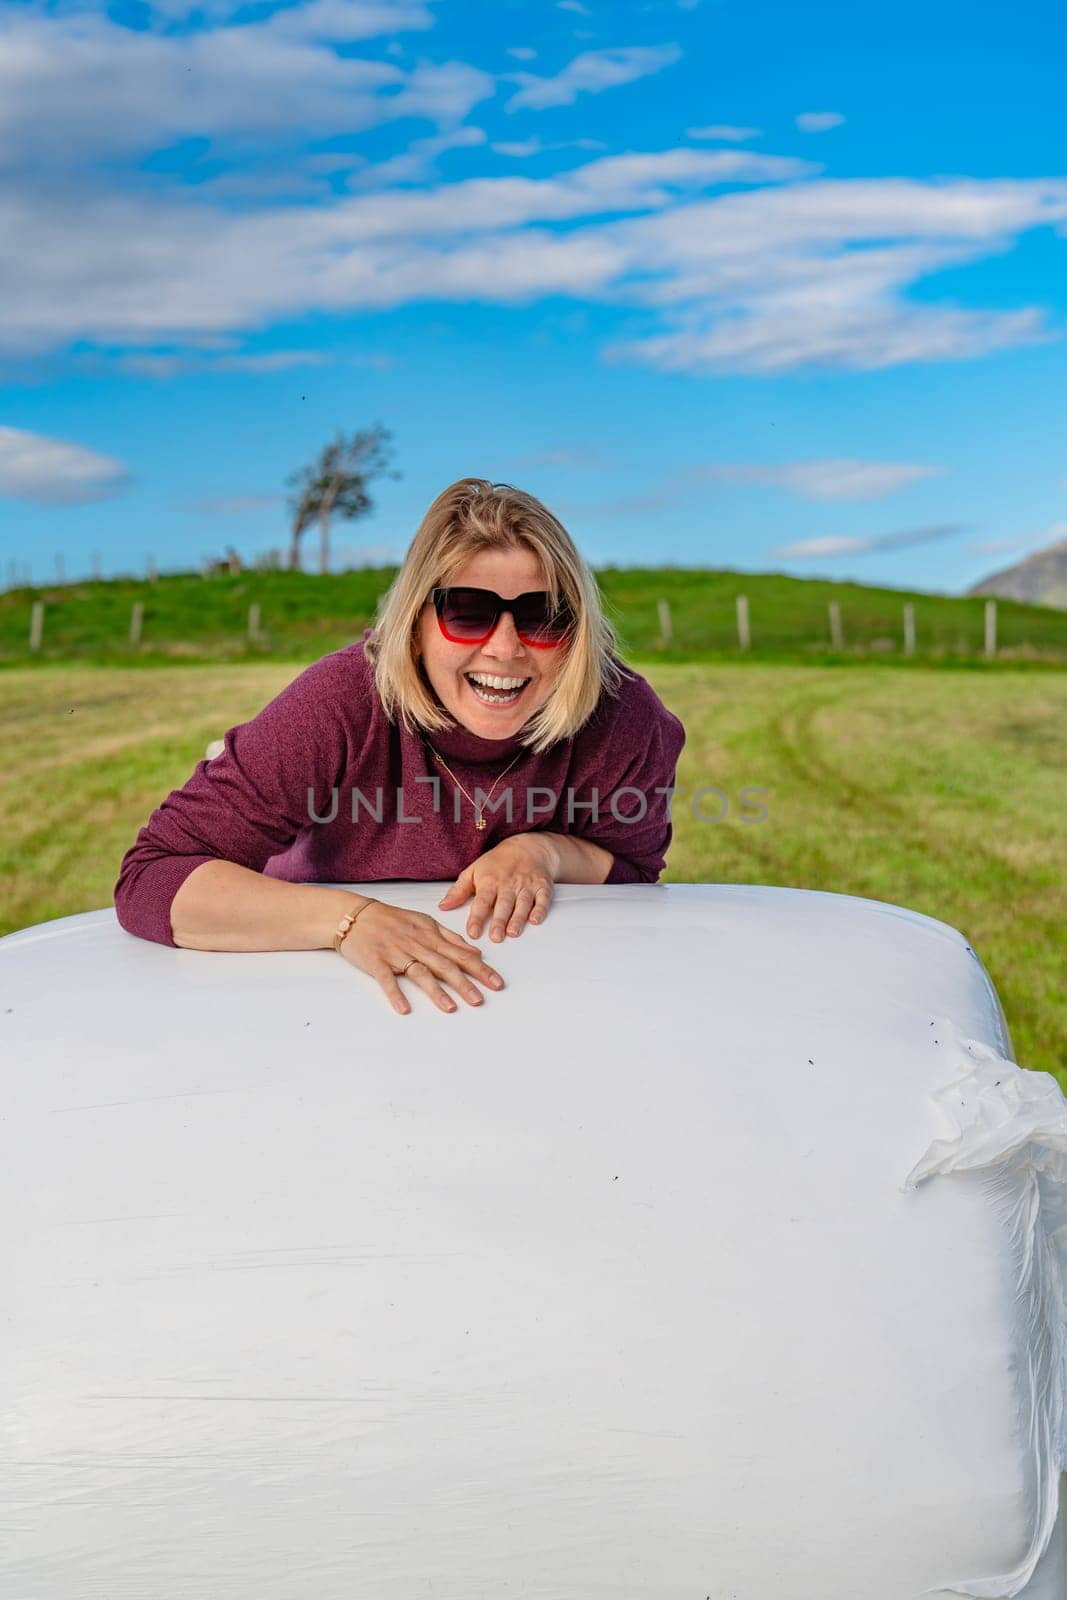 A 40-year-old woman basking in the tranquil aura, casually seated on a densely packed heap of hay in the midst of a charming farm field landscape, revealing a sense of peace and natural elegance.